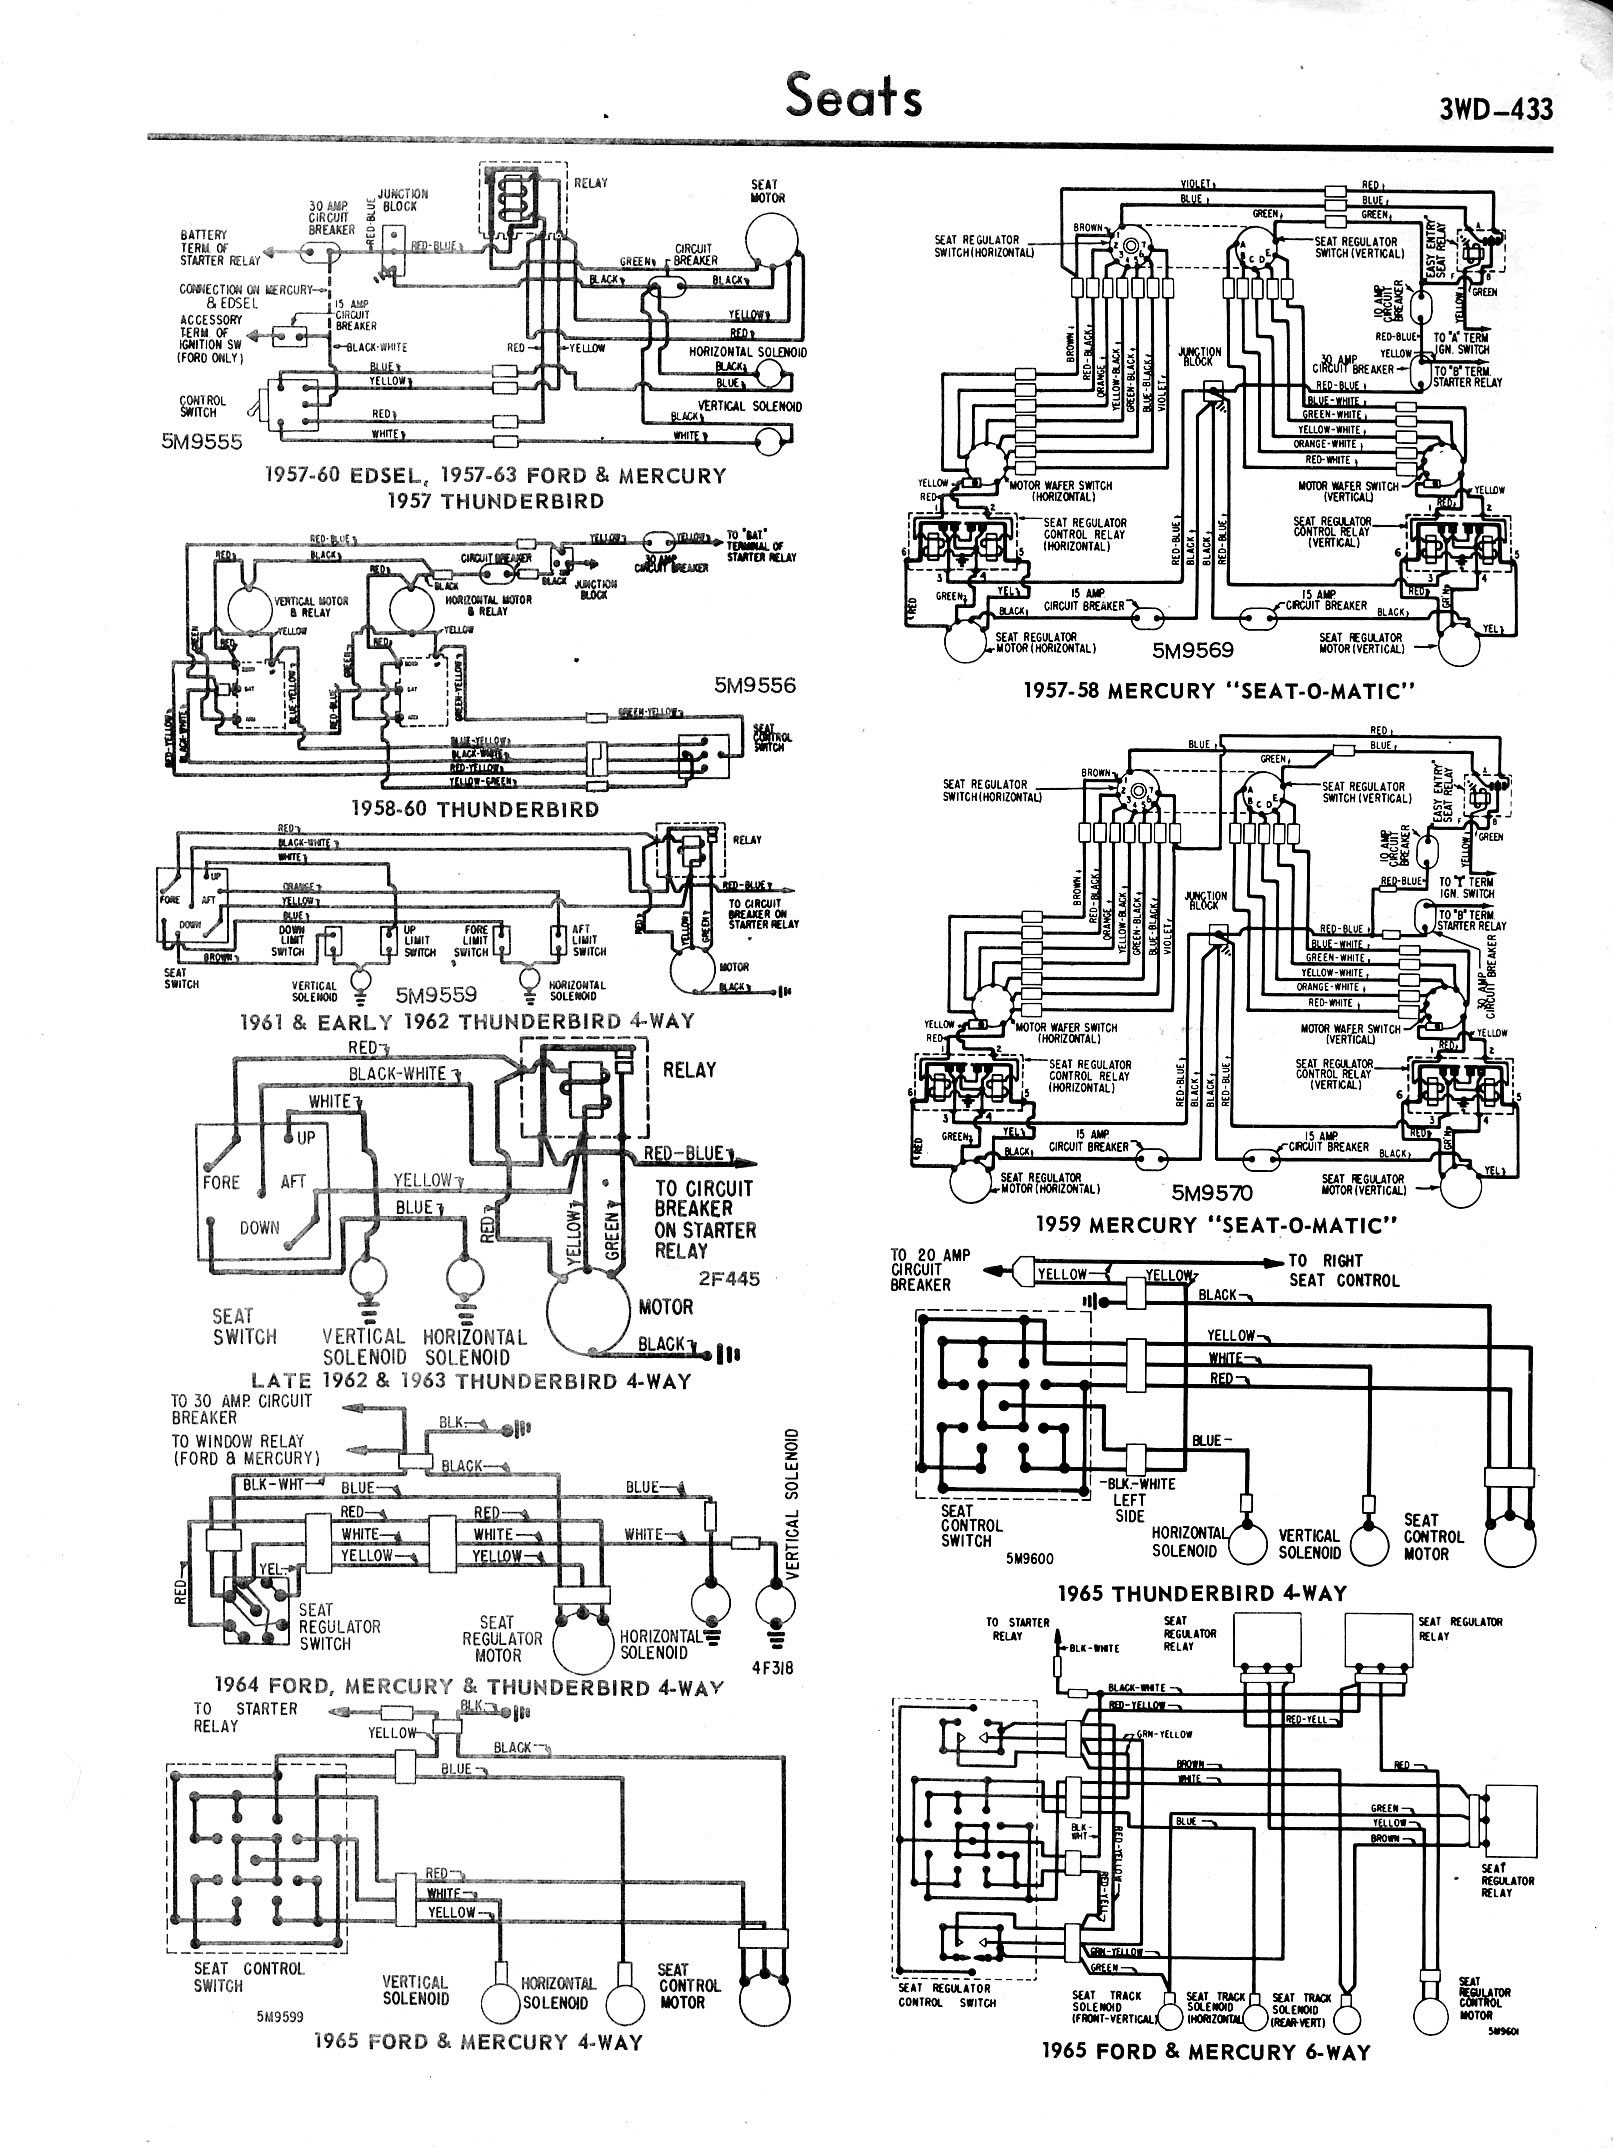 Ford Power Seat Wiring Diagram from www.wiring-wizard.com